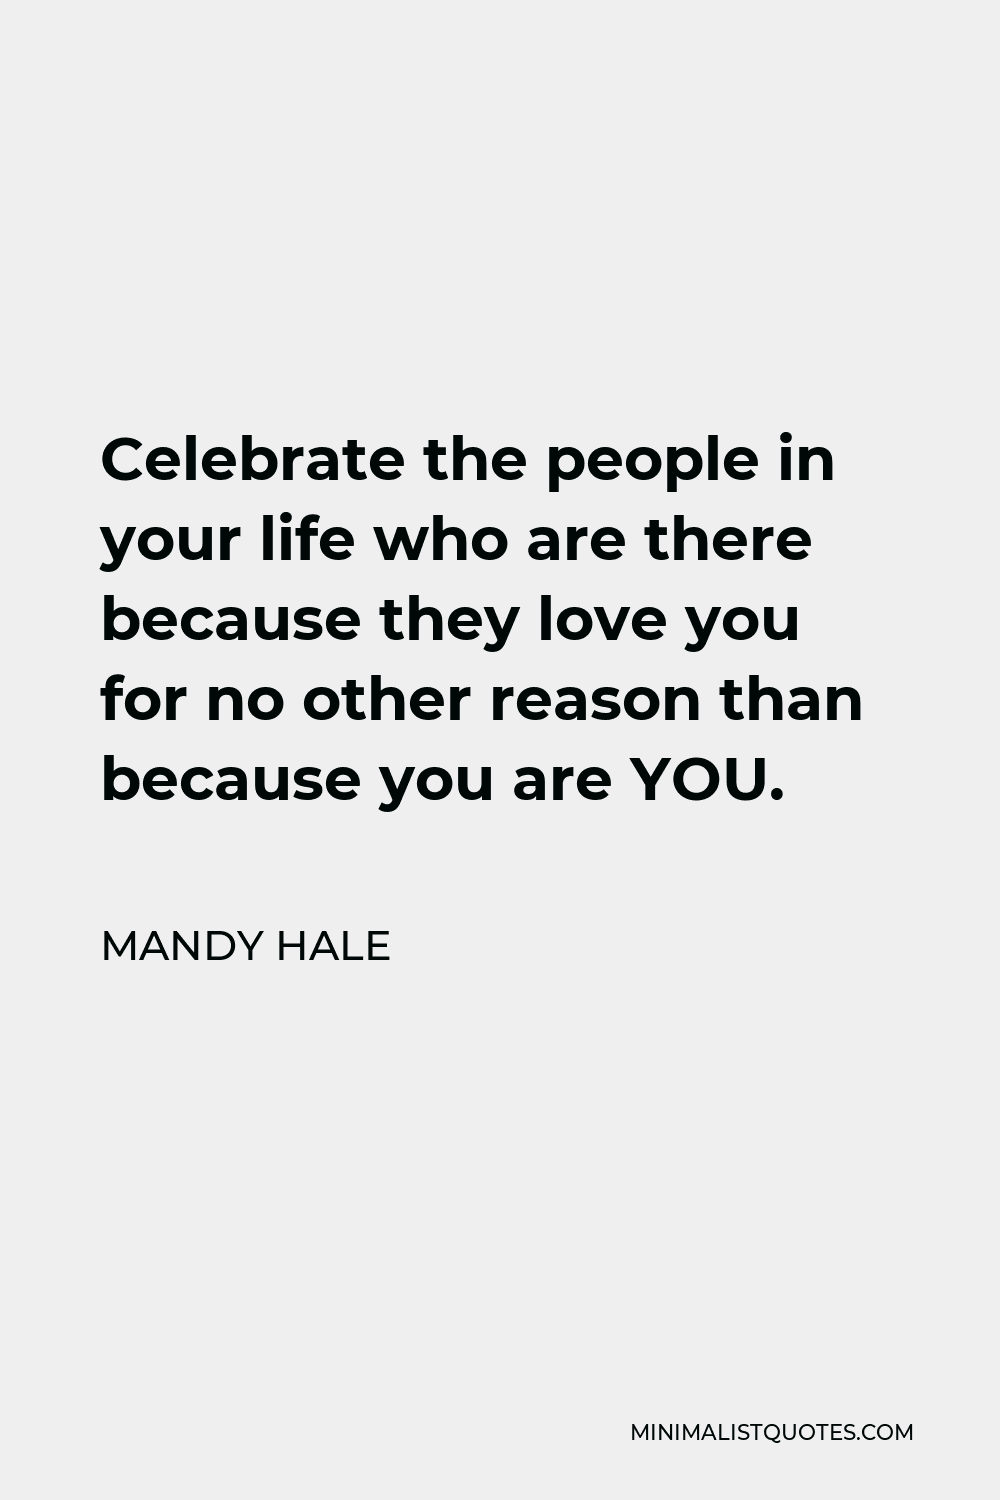 Mandy Hale Quote - Celebrate the people in your life who are there because they love you for no other reason than because you are YOU.